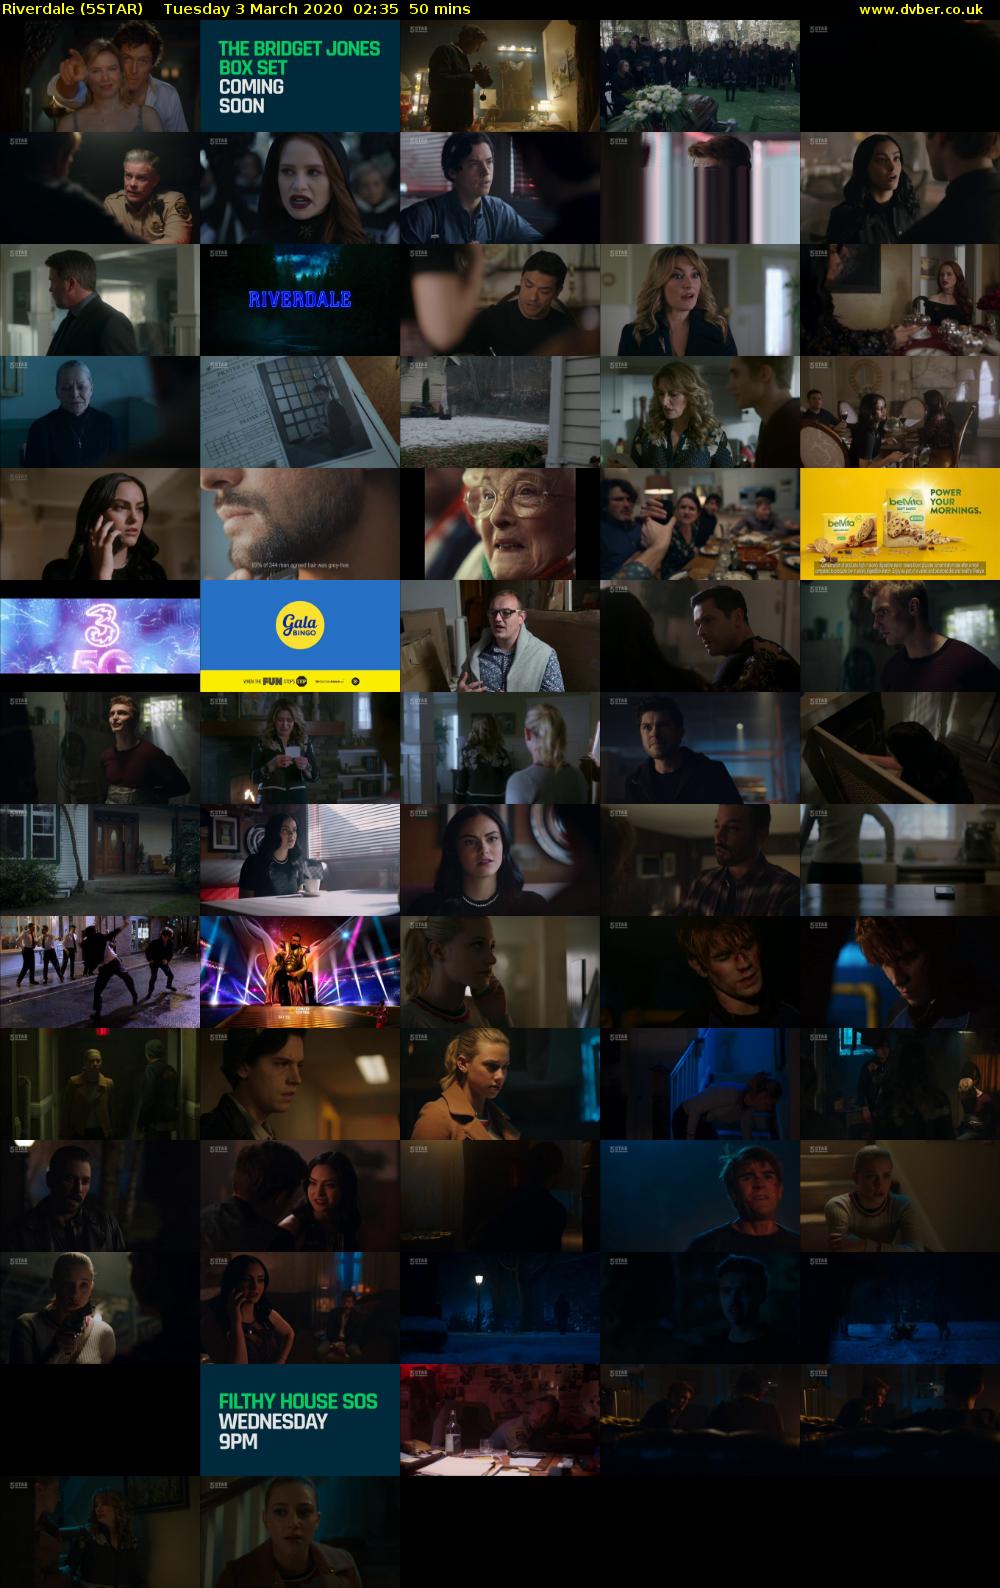 Riverdale (5STAR) Tuesday 3 March 2020 02:35 - 03:25